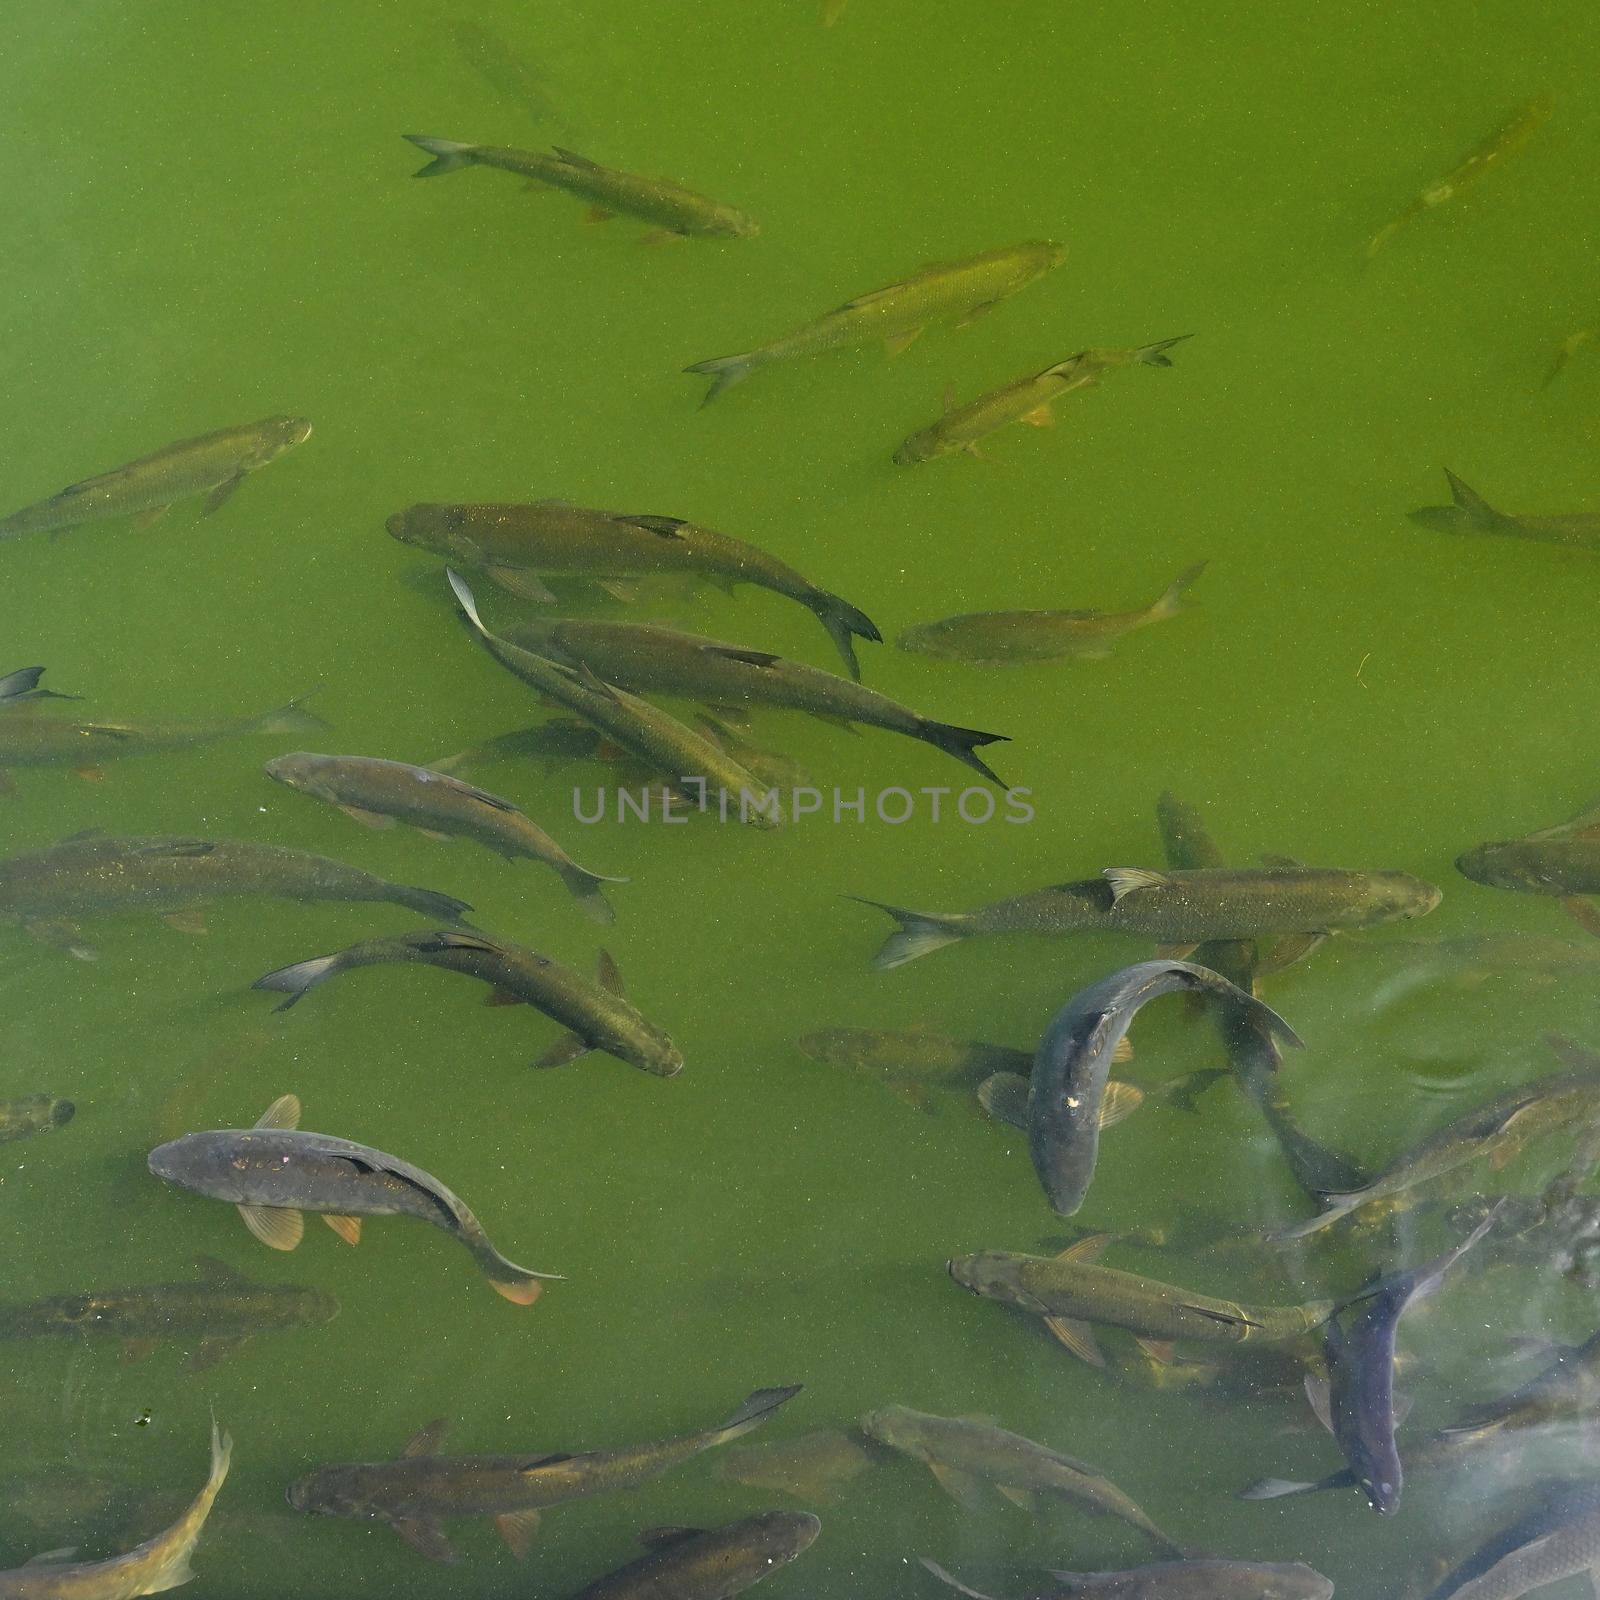 Fish in water. Common carp (Cyprinus carpio) Concept for sport fishing and animals in nature